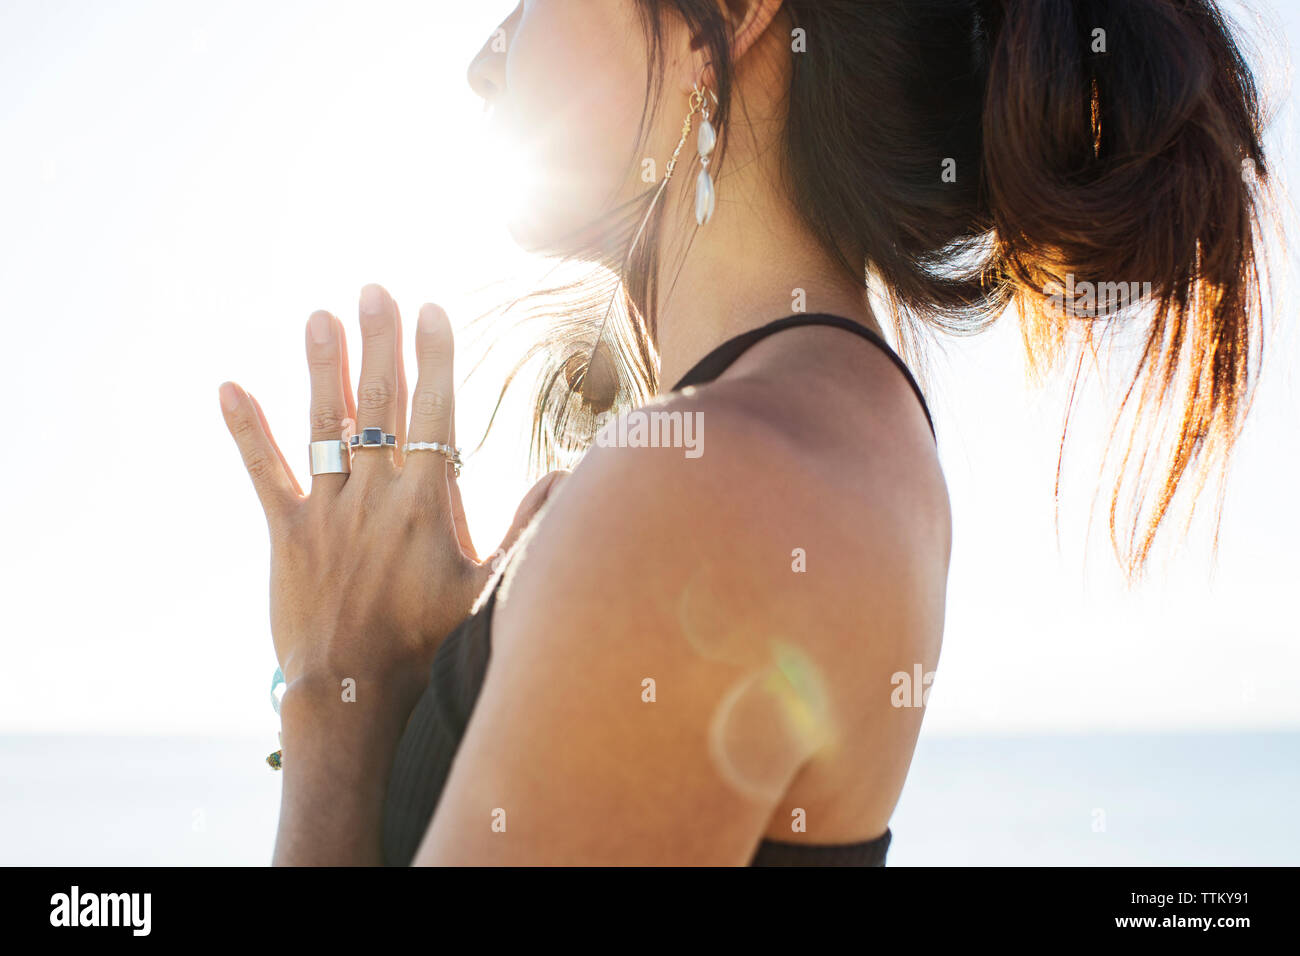 Midsection of woman meditating on beach during summer Stock Photo